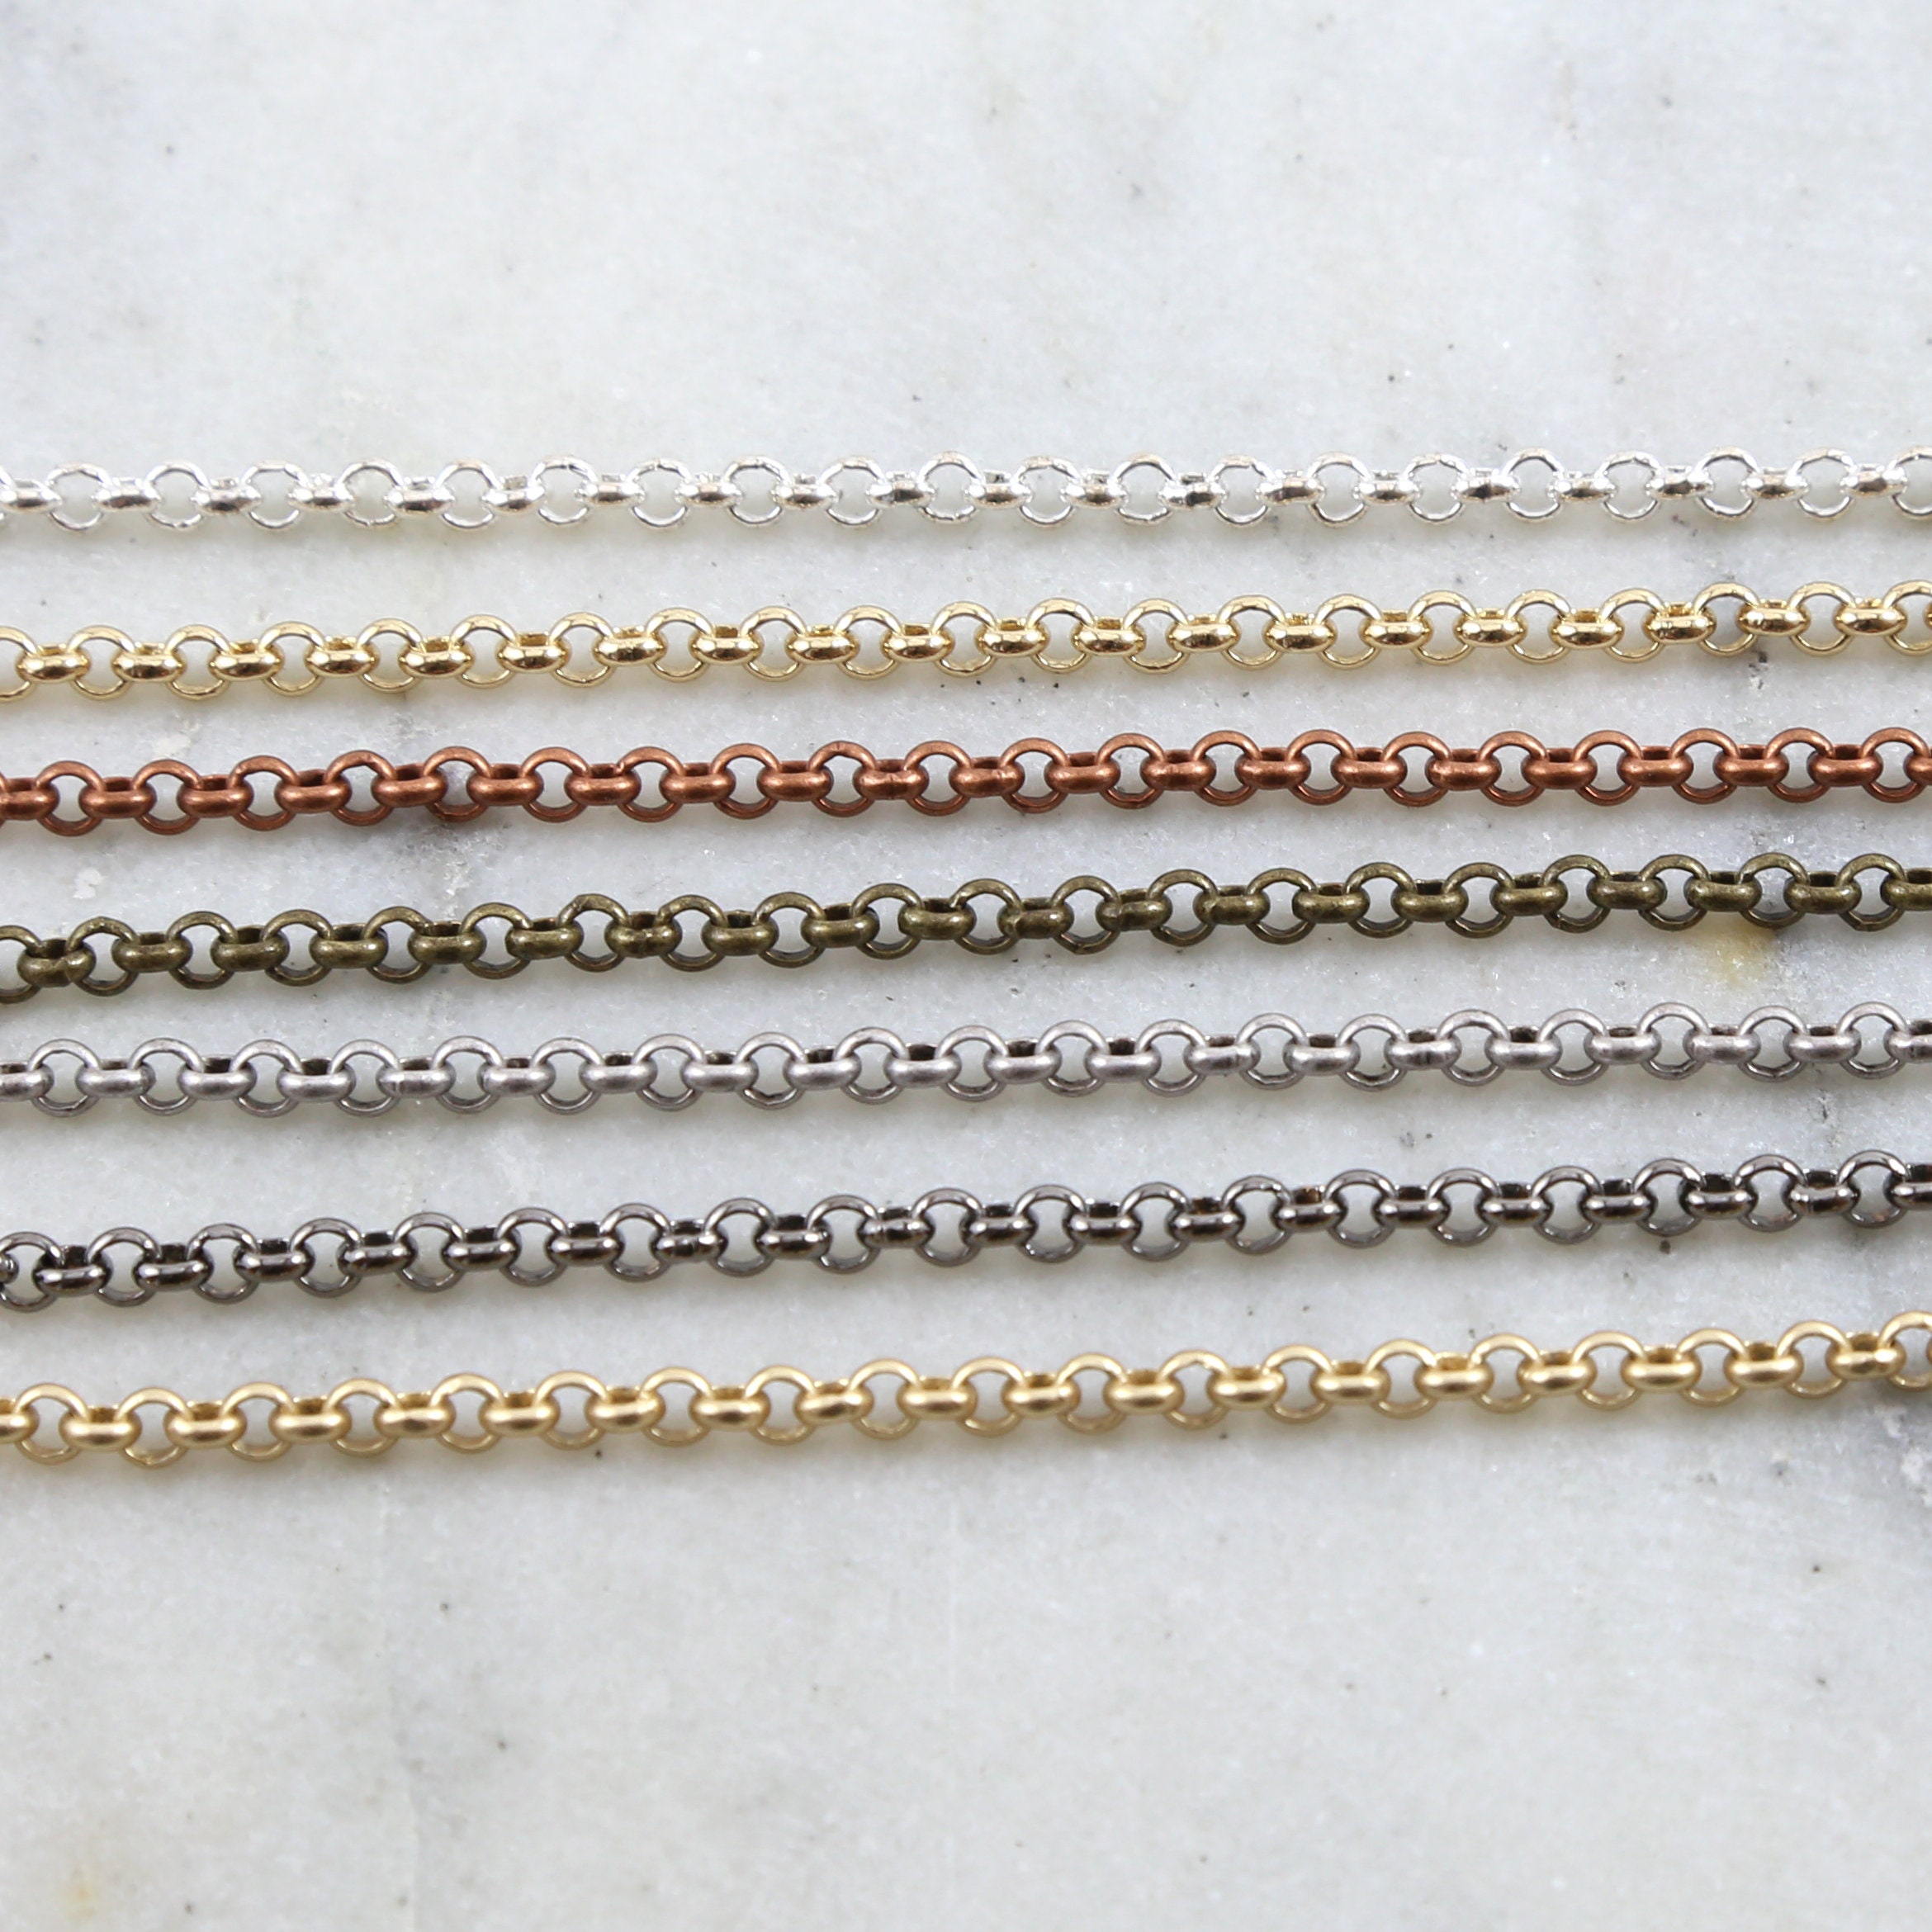 3METER FULL LENGTH 2.5MM JEWELRY MAKING CHAIN, Gold PLATED – Madeinindia  Beads